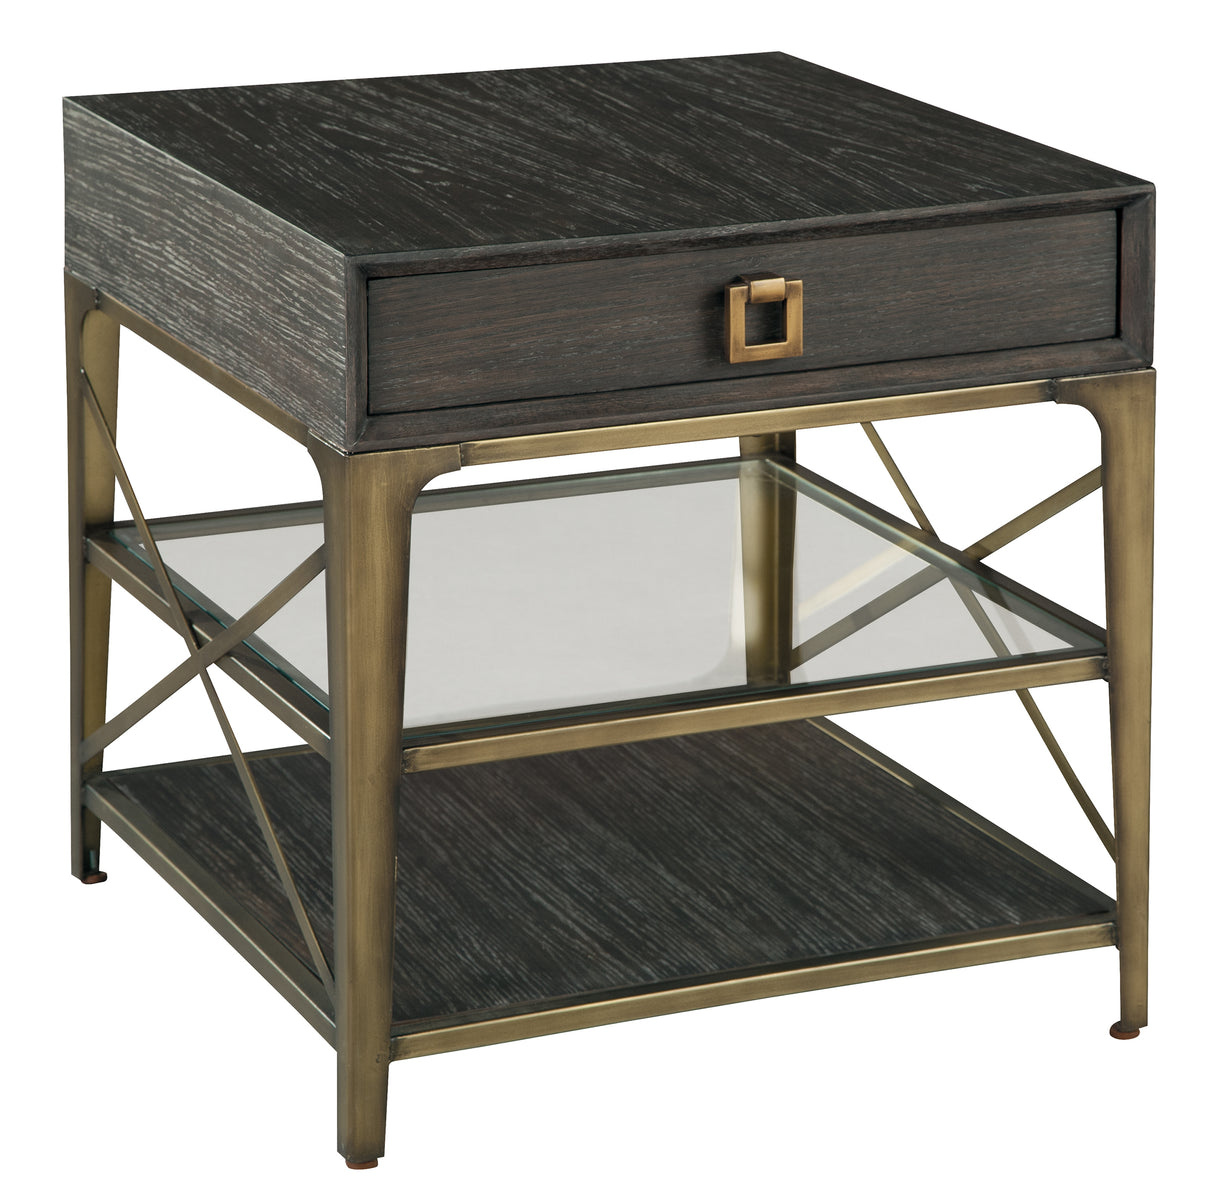 Hekman 23803 Edgewater 24.25in. x 25in. x 25.25in. End Table